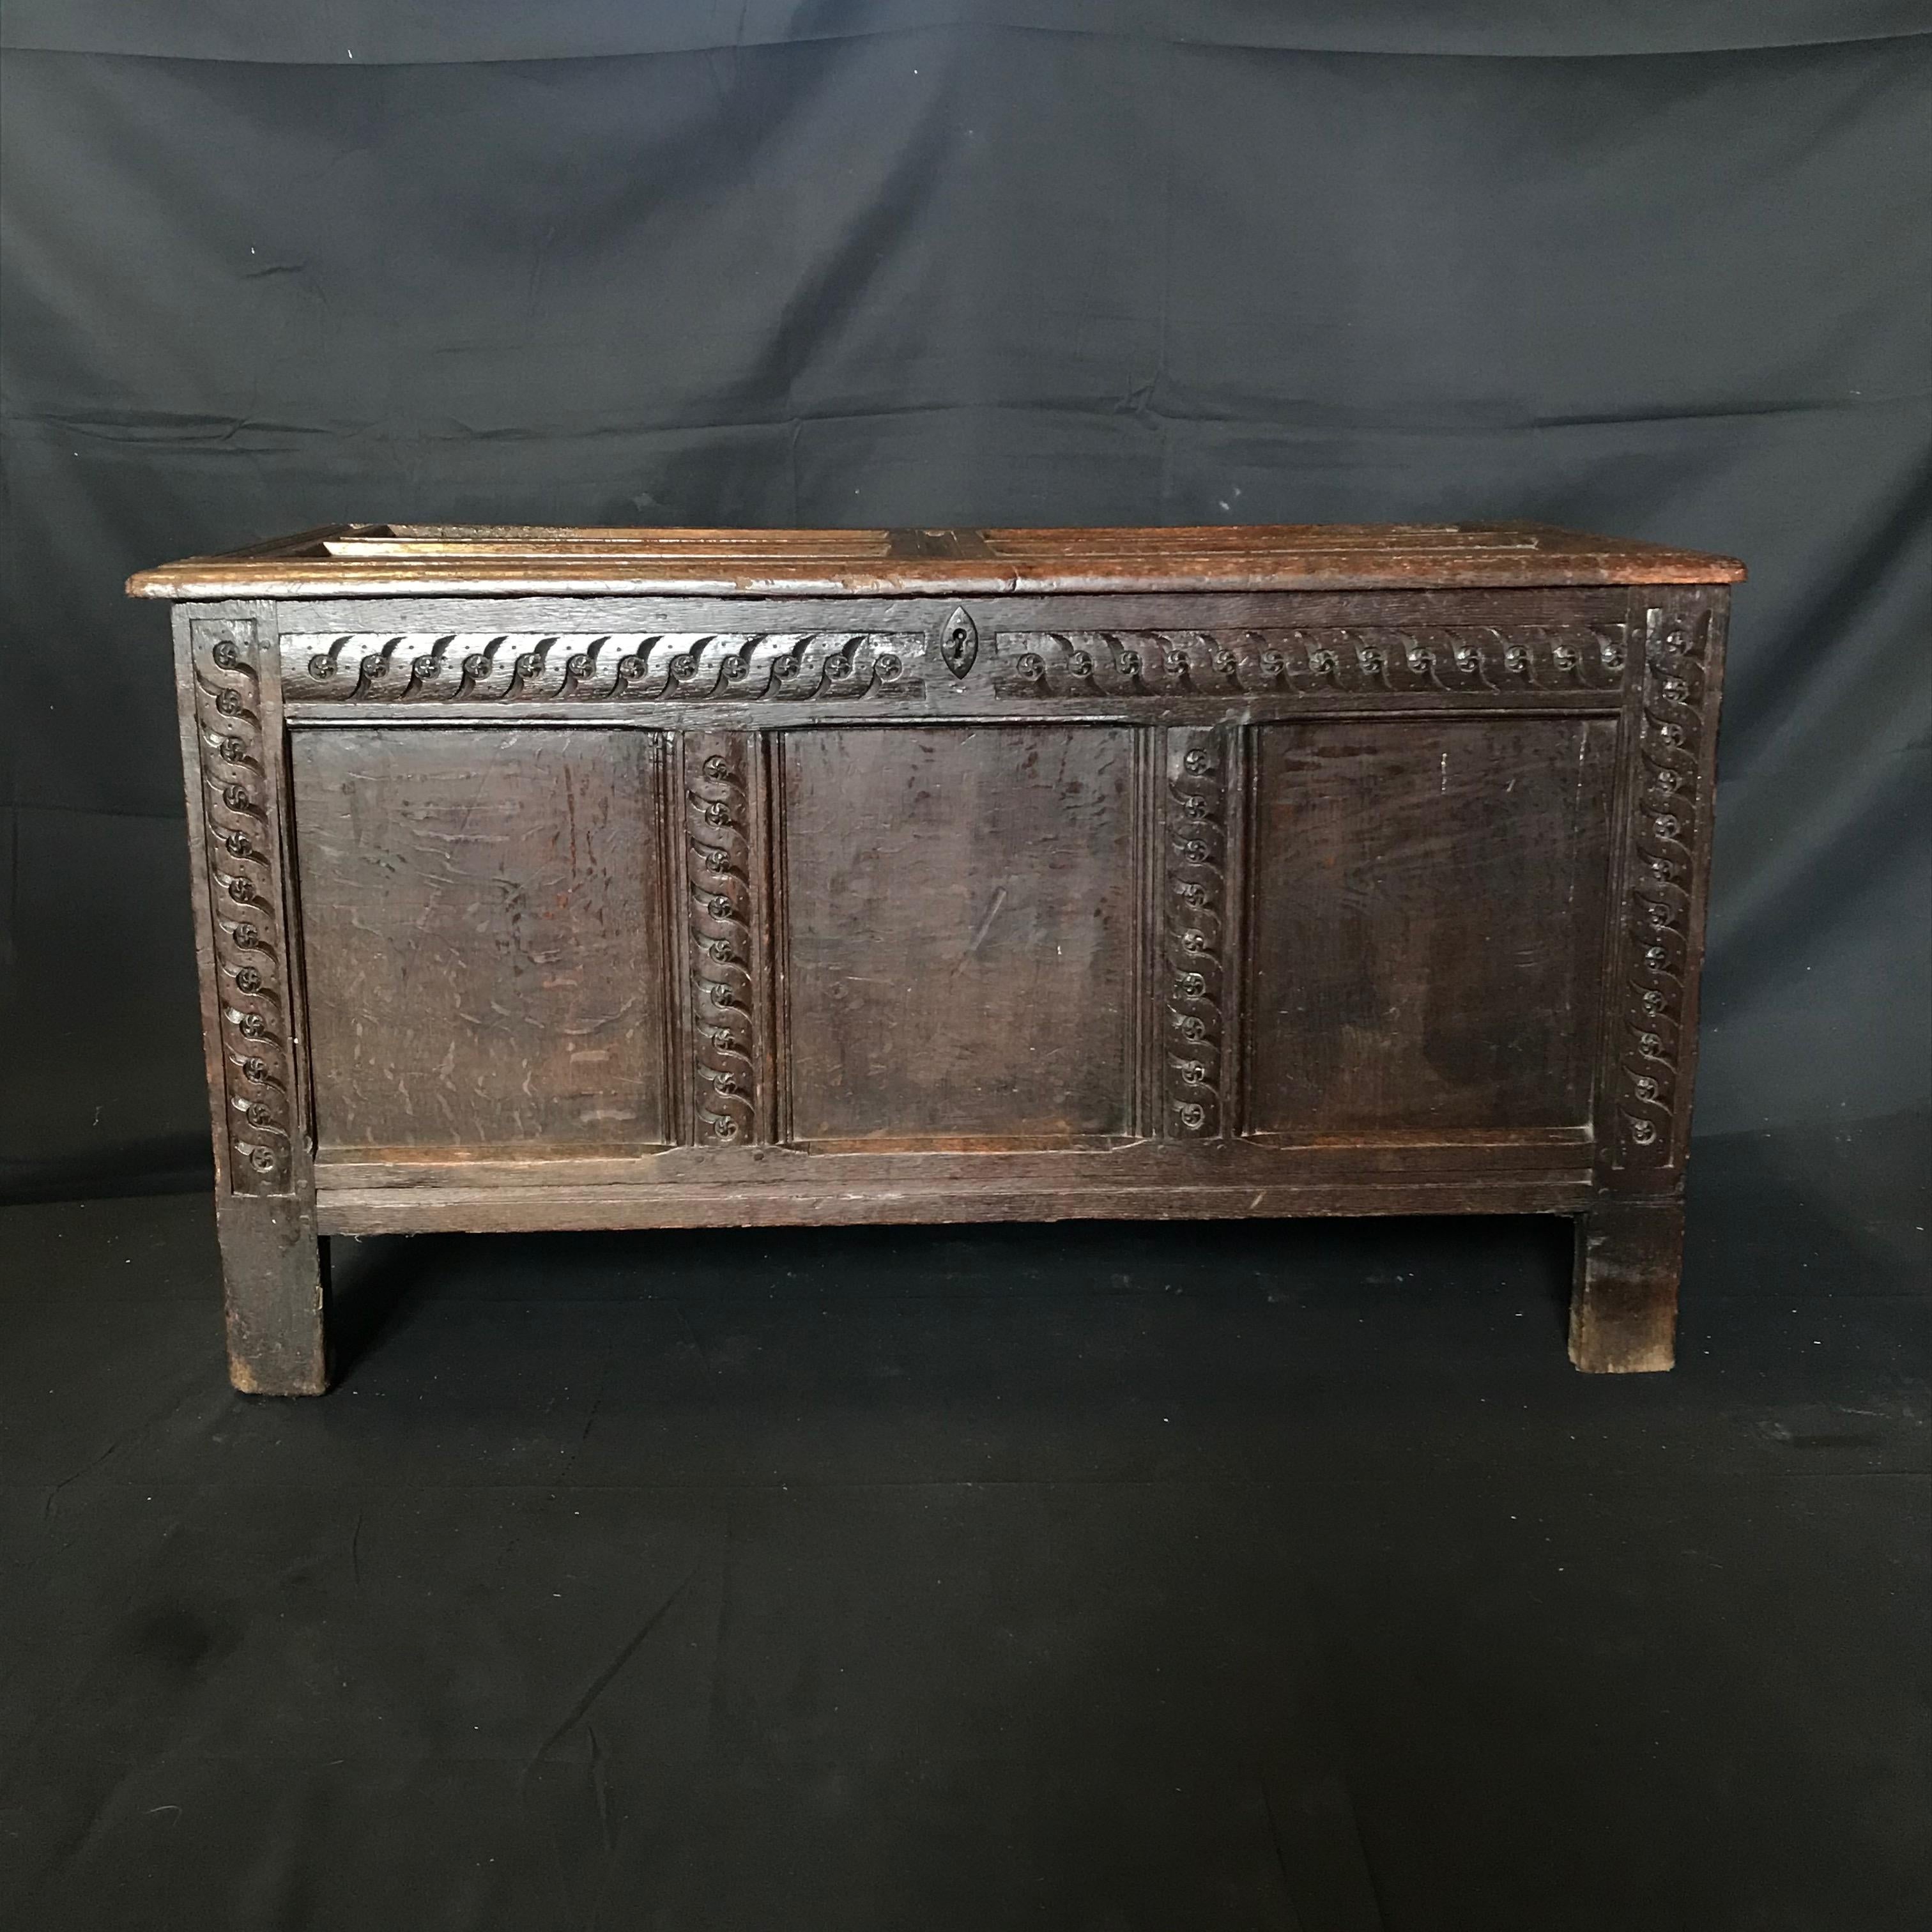 18th century paneled oak Scottish coffer, with three panels to the front, two panels to each side, raised on stile feet, original steel lock plate and hinges, gorgeous rope weave pattern surrounding panels, lovely color and patina and great